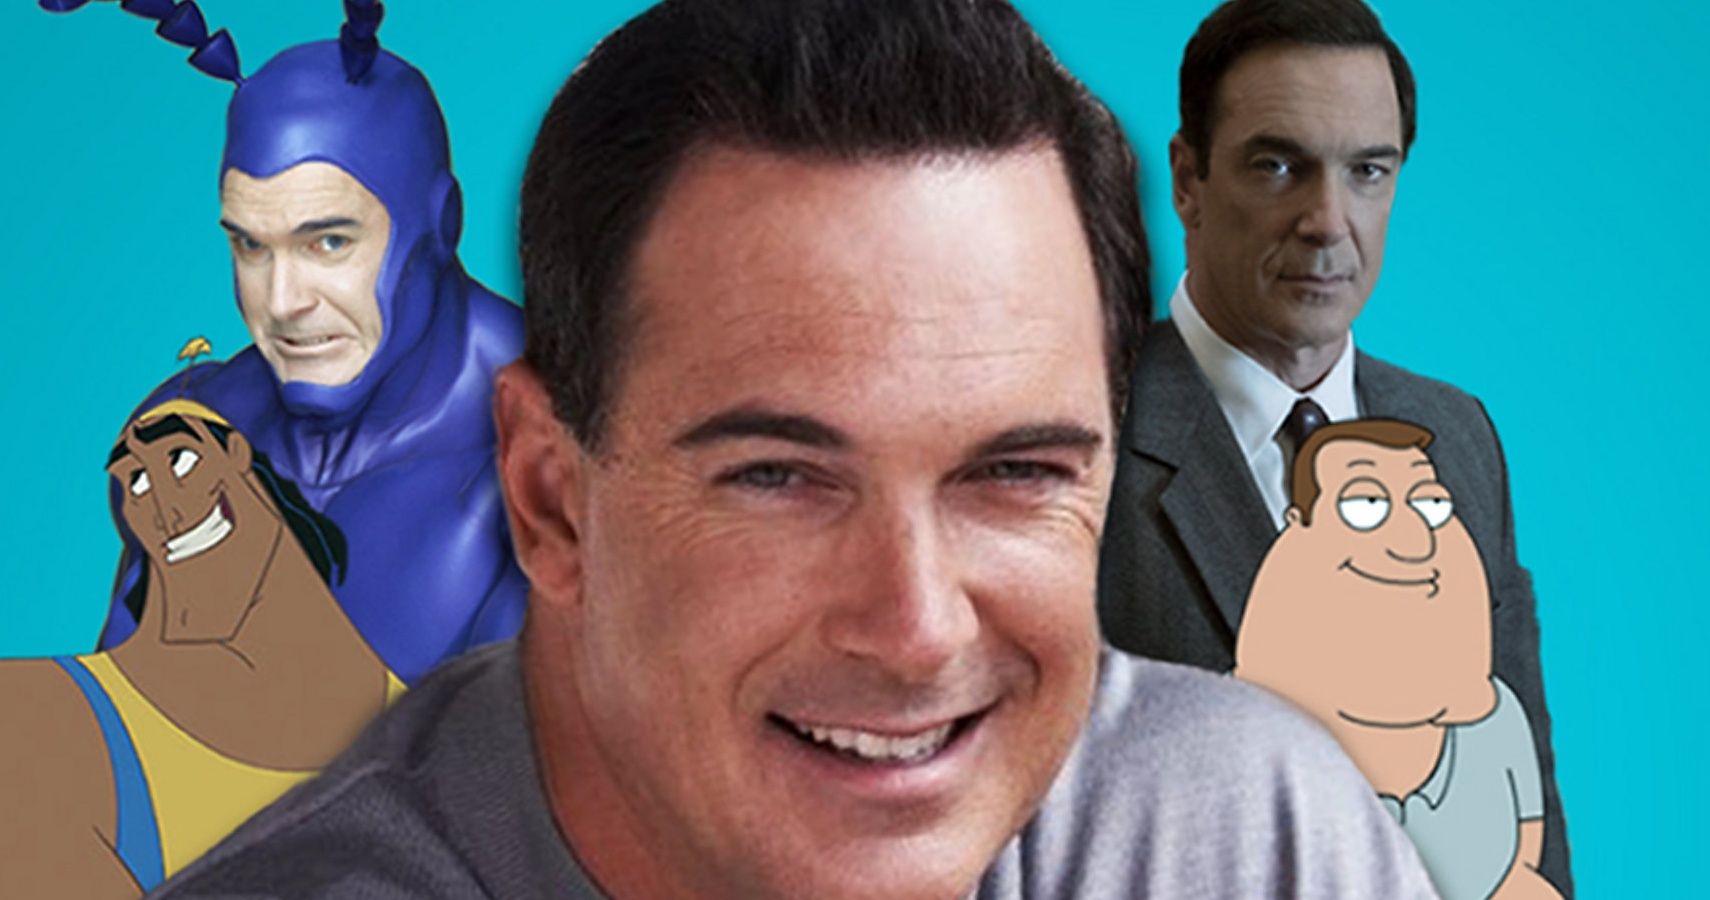 Of Patrick Warburton S Most Iconic Voice Acting Roles